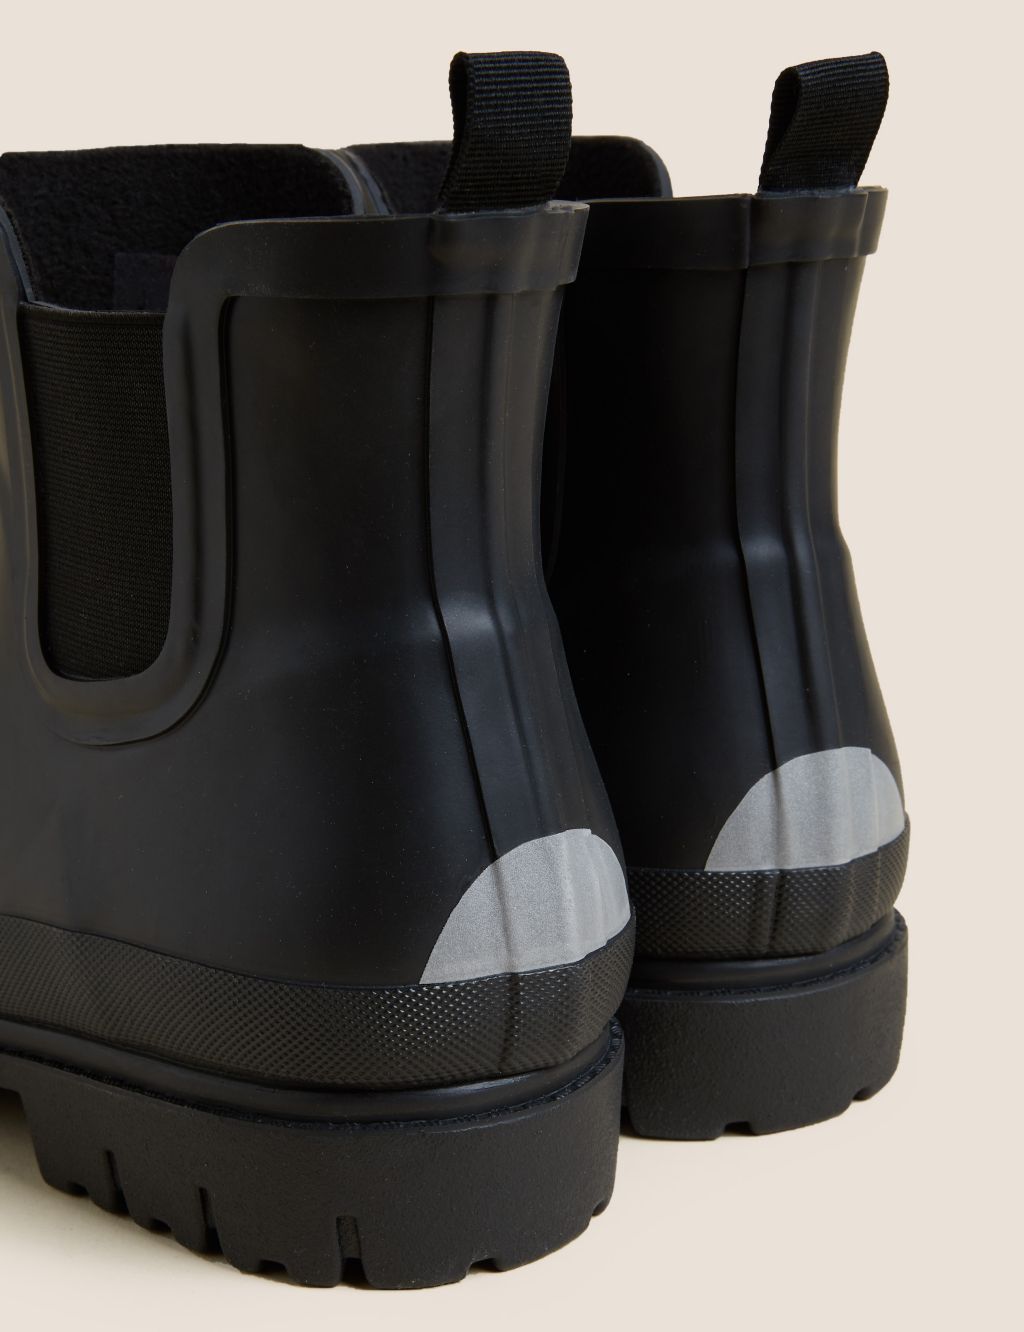 Waterproof Pull-On Chelsea Boots image 2